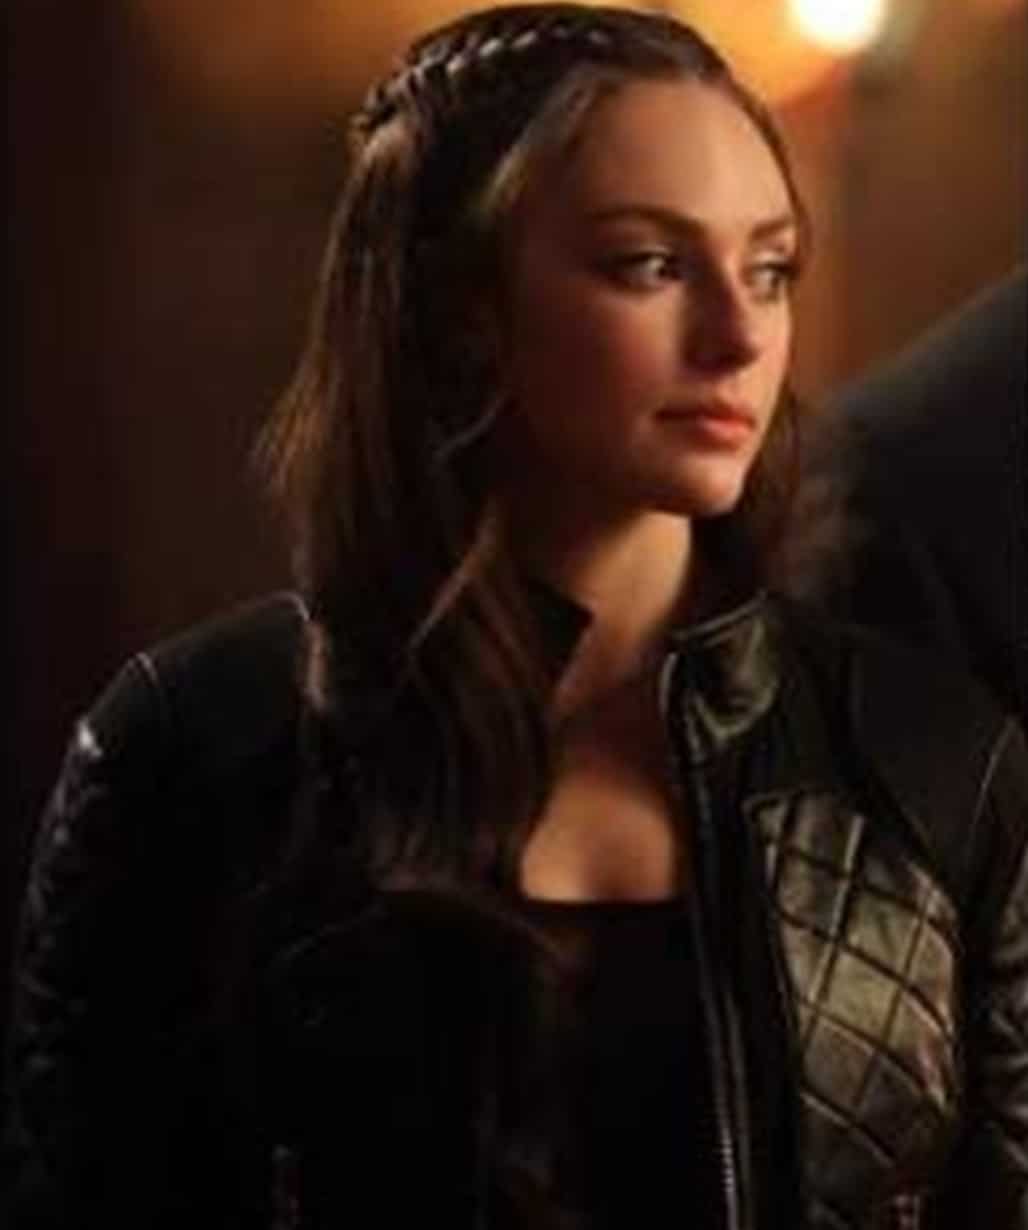 hope-mikaelson-legacies-season-4-quilted-leather-jacket